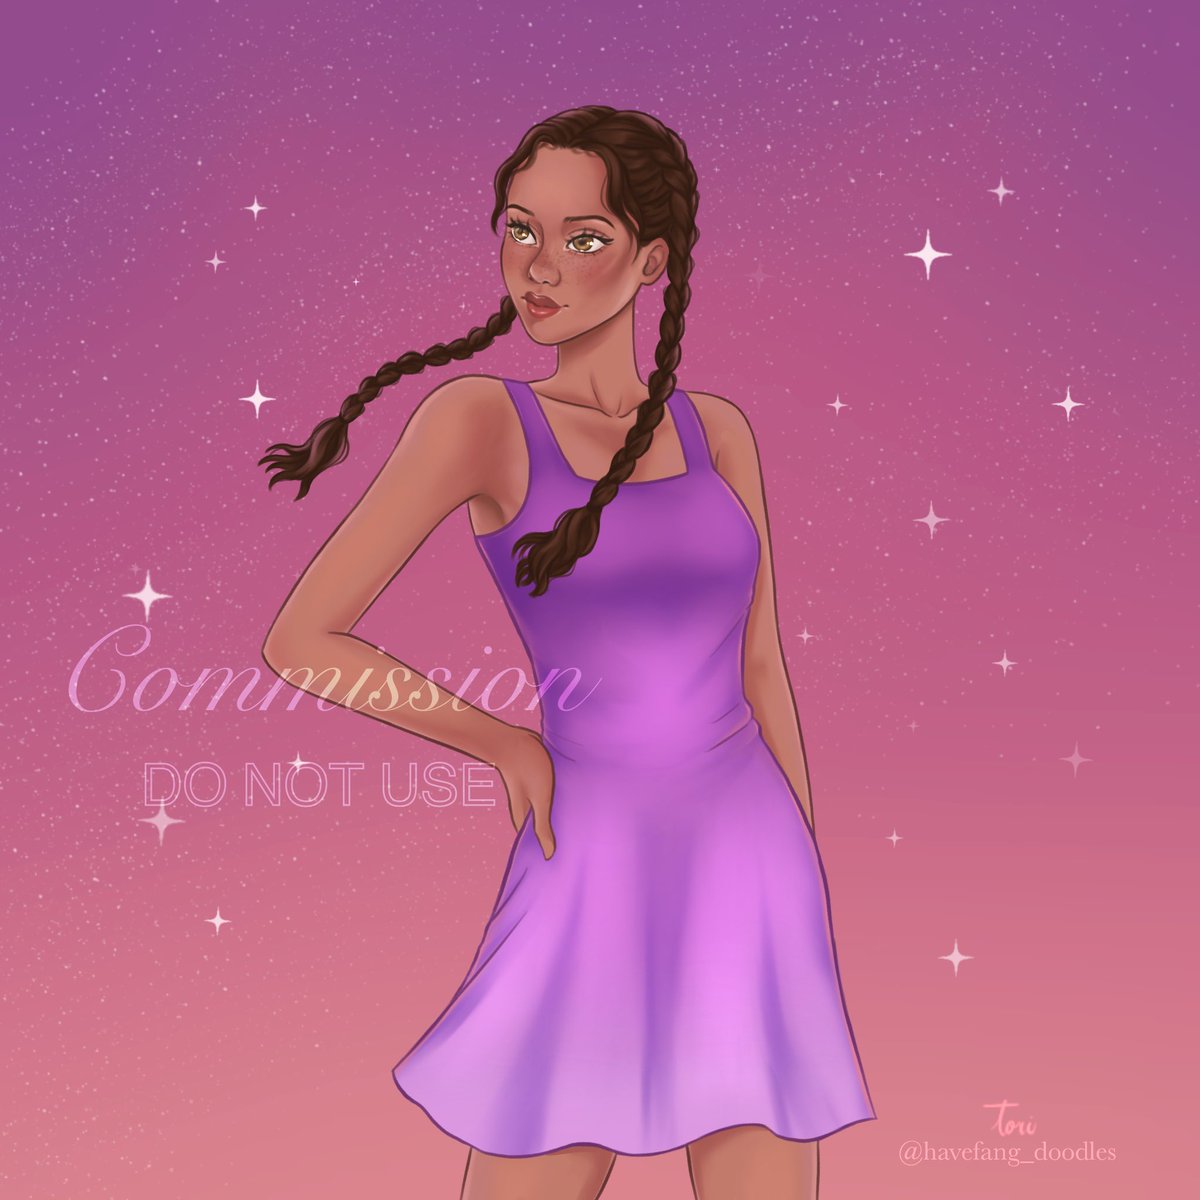 Brandy from “This Night Is Ours”✨✨ Character belongs to @lilrongal #commissionart #booklovers #commisionsopen